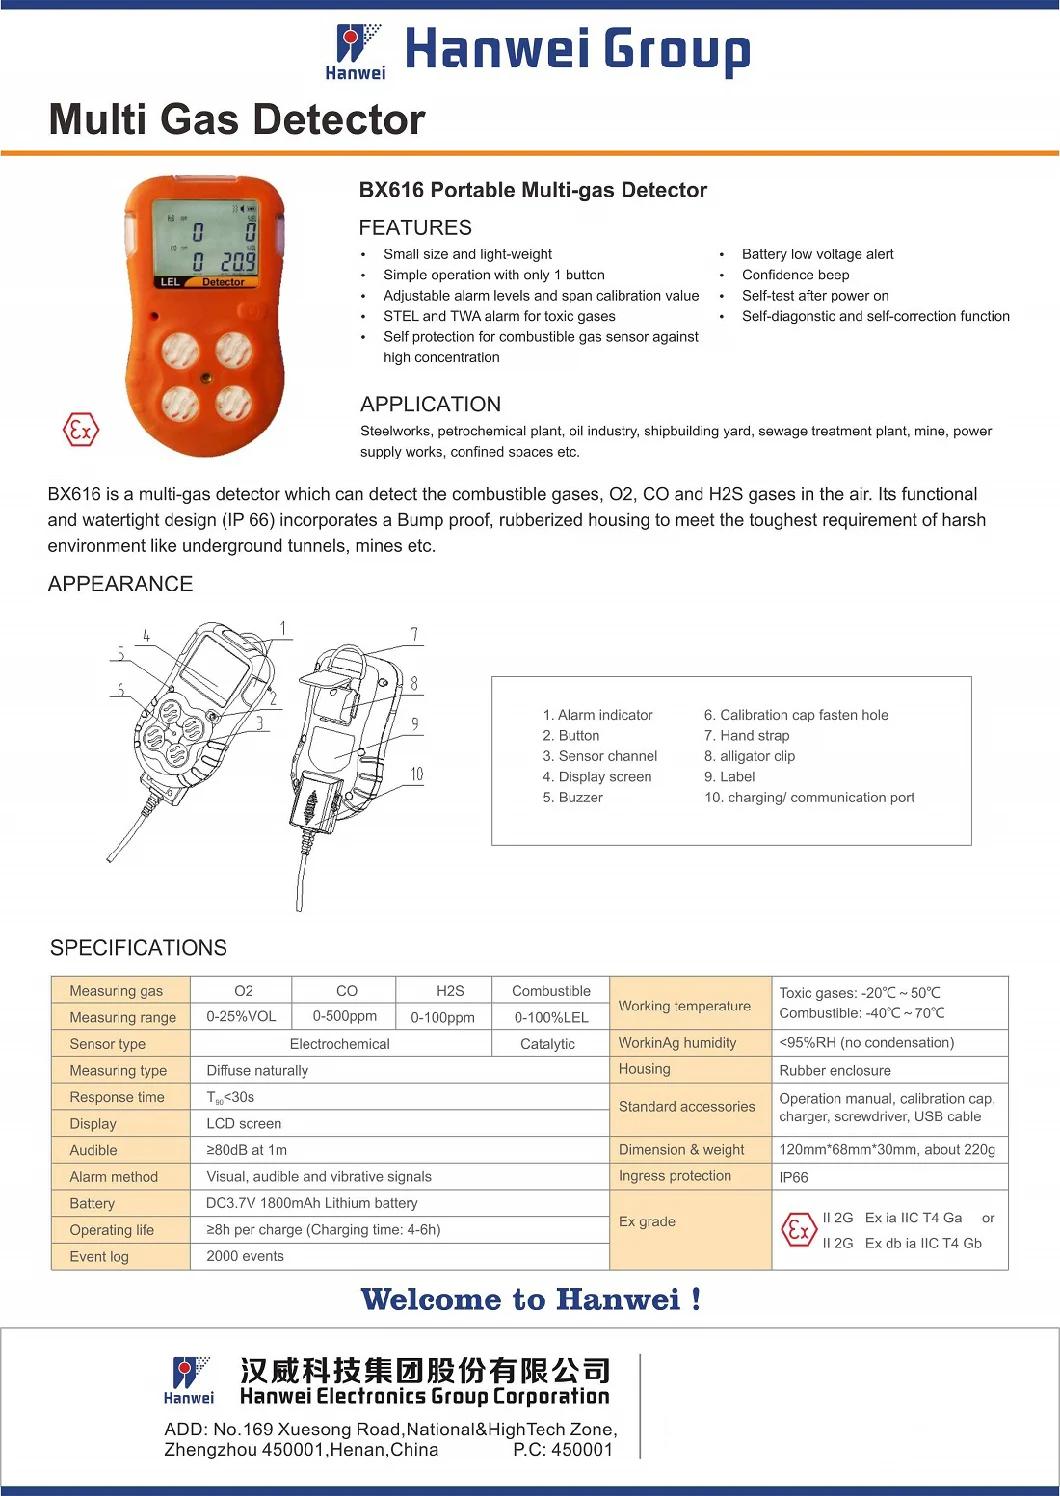 Portable Multi Gas Detector for Mine, Diffusion 4 Gas Detector for Lel, Co, O2, H2s